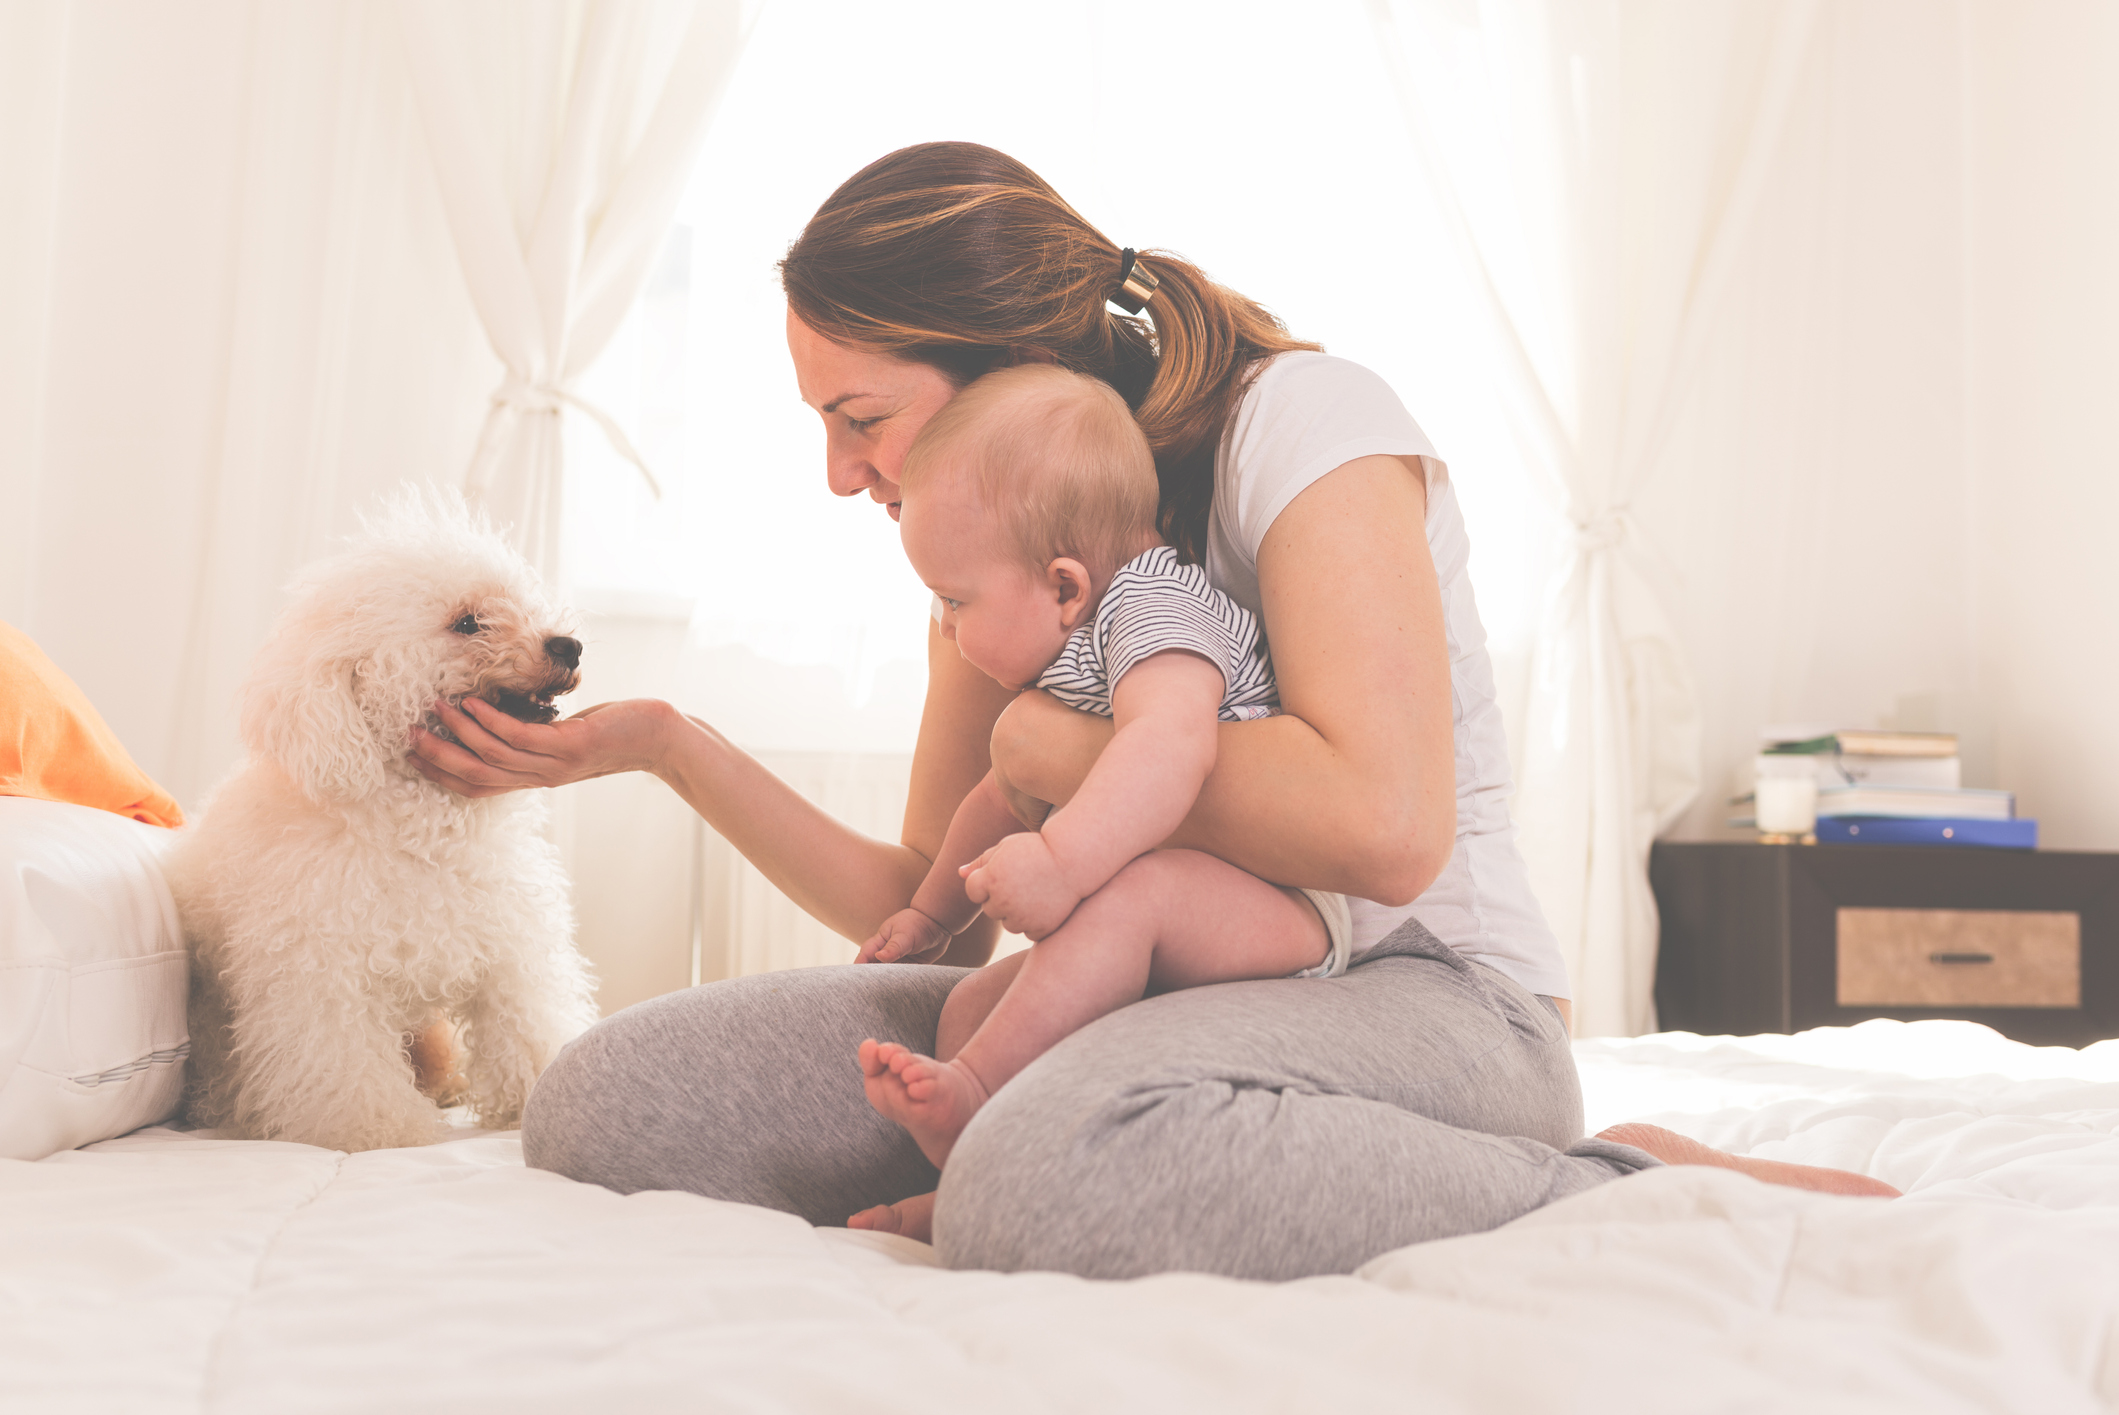 A new mom introduces her baby to the family dog on the bed